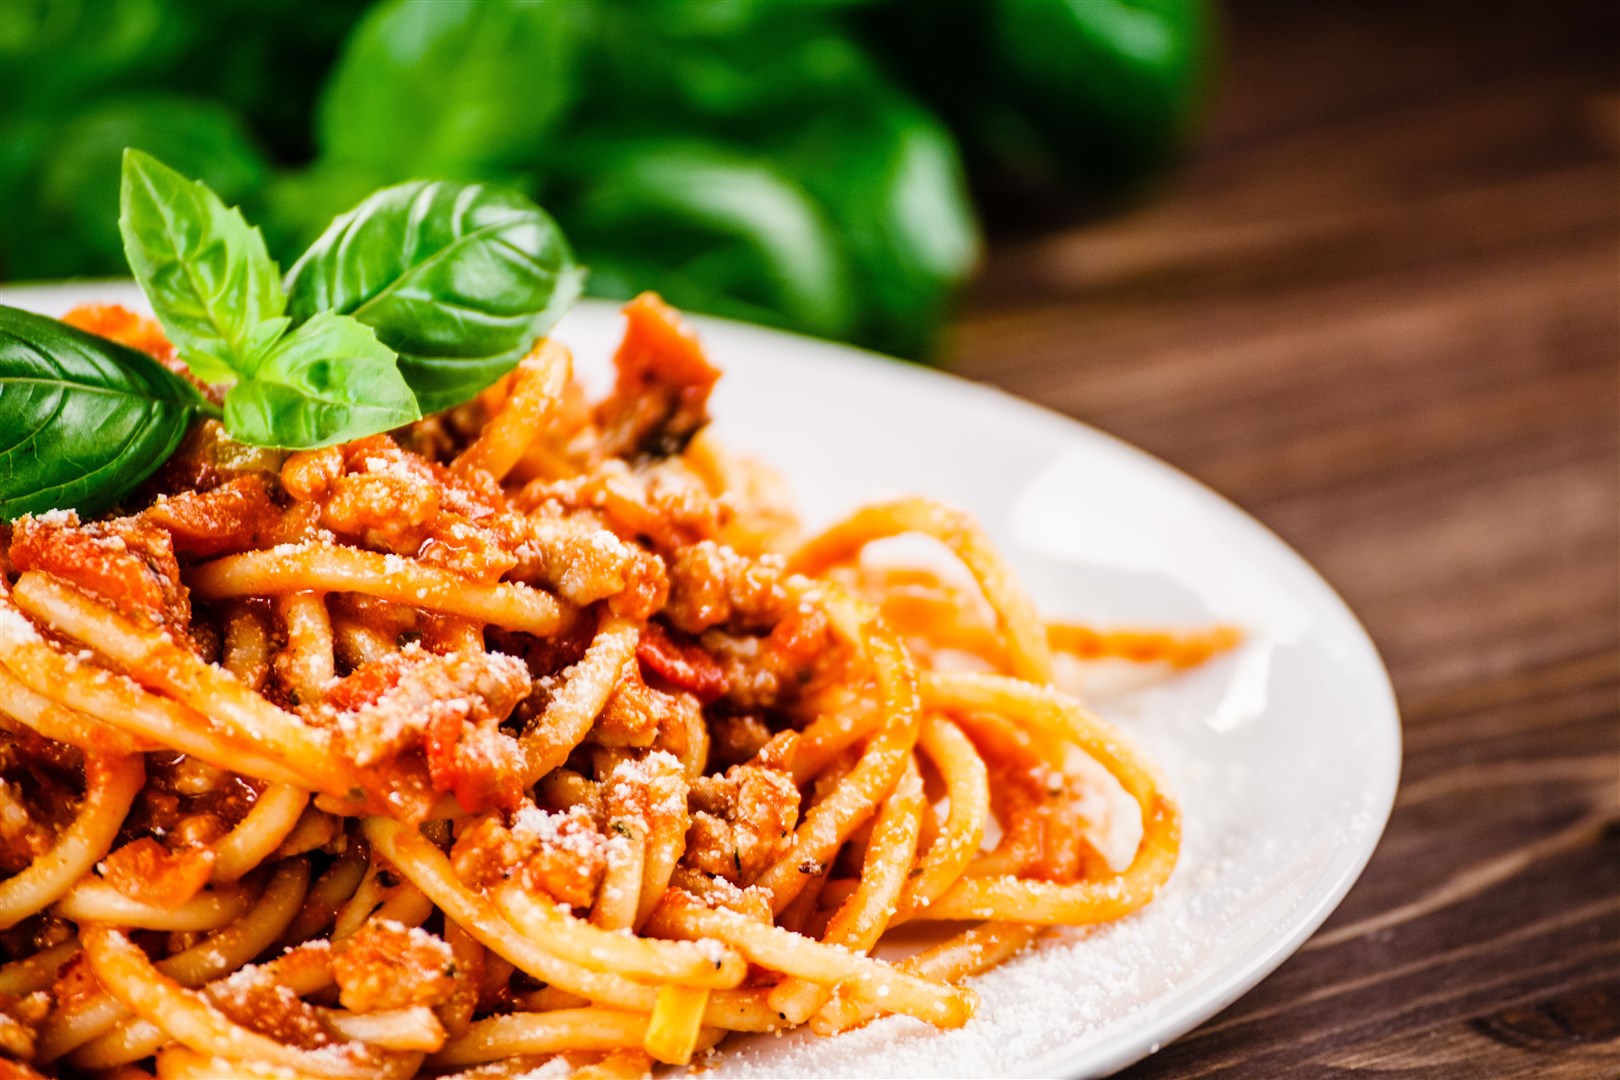 Pasta with meat, tomato sauce and vegetables.